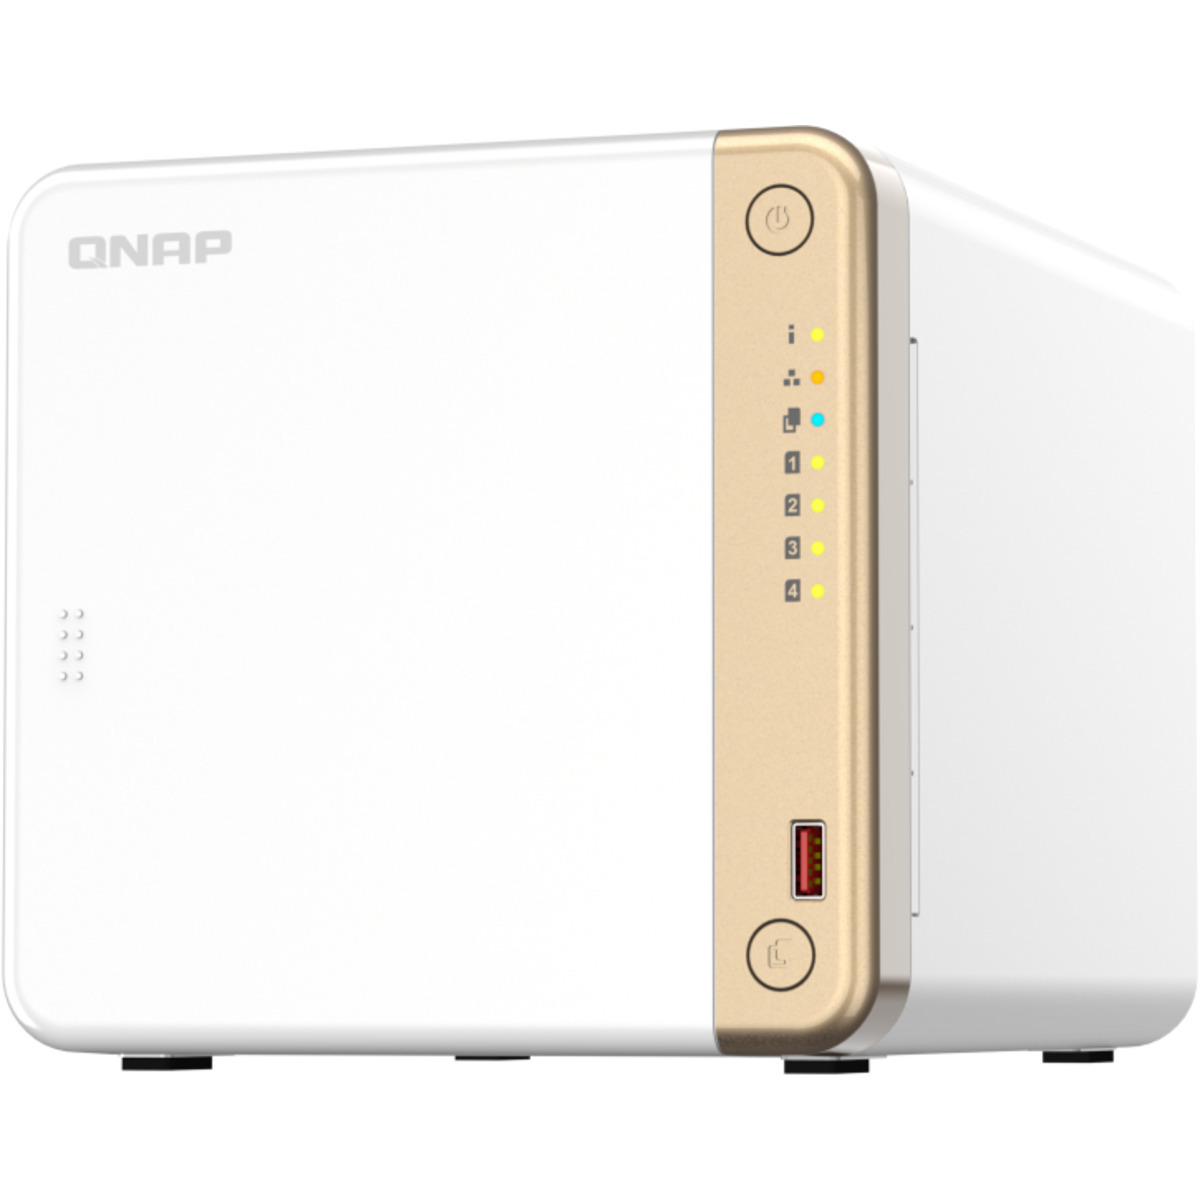 QNAP TS-462 40tb 4-Bay Desktop Multimedia / Power User / Business NAS - Network Attached Storage Device 4x10tb Seagate IronWolf Pro ST10000NT001 3.5 7200rpm SATA 6Gb/s HDD NAS Class Drives Installed - Burn-In Tested - ON SALE TS-462